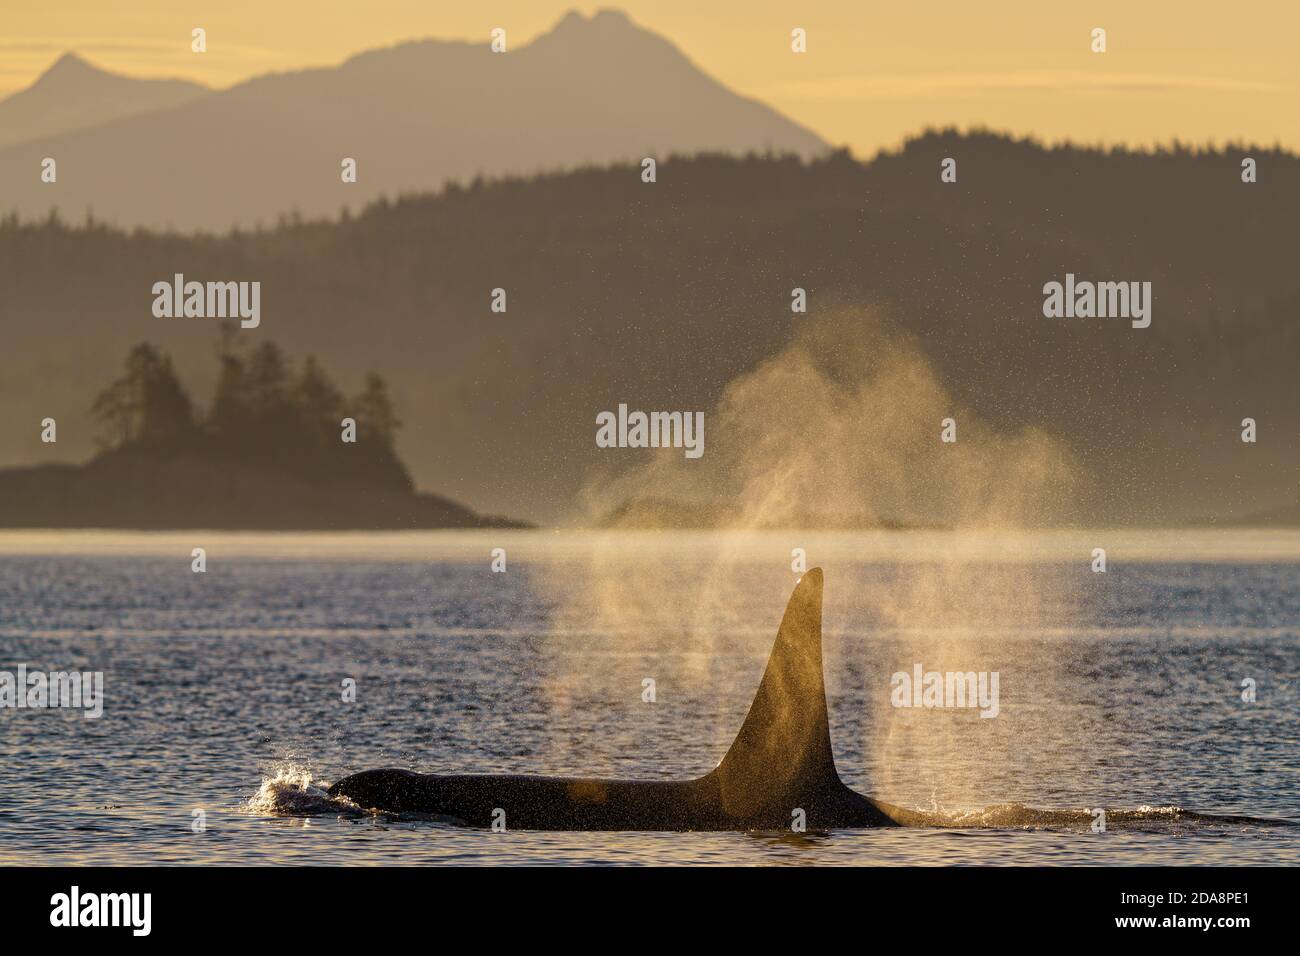 Male northern resident killer whale (Orca) off the British Columbia coast, Great Bear Rainforest, British Columbia, Canada Stock Photo